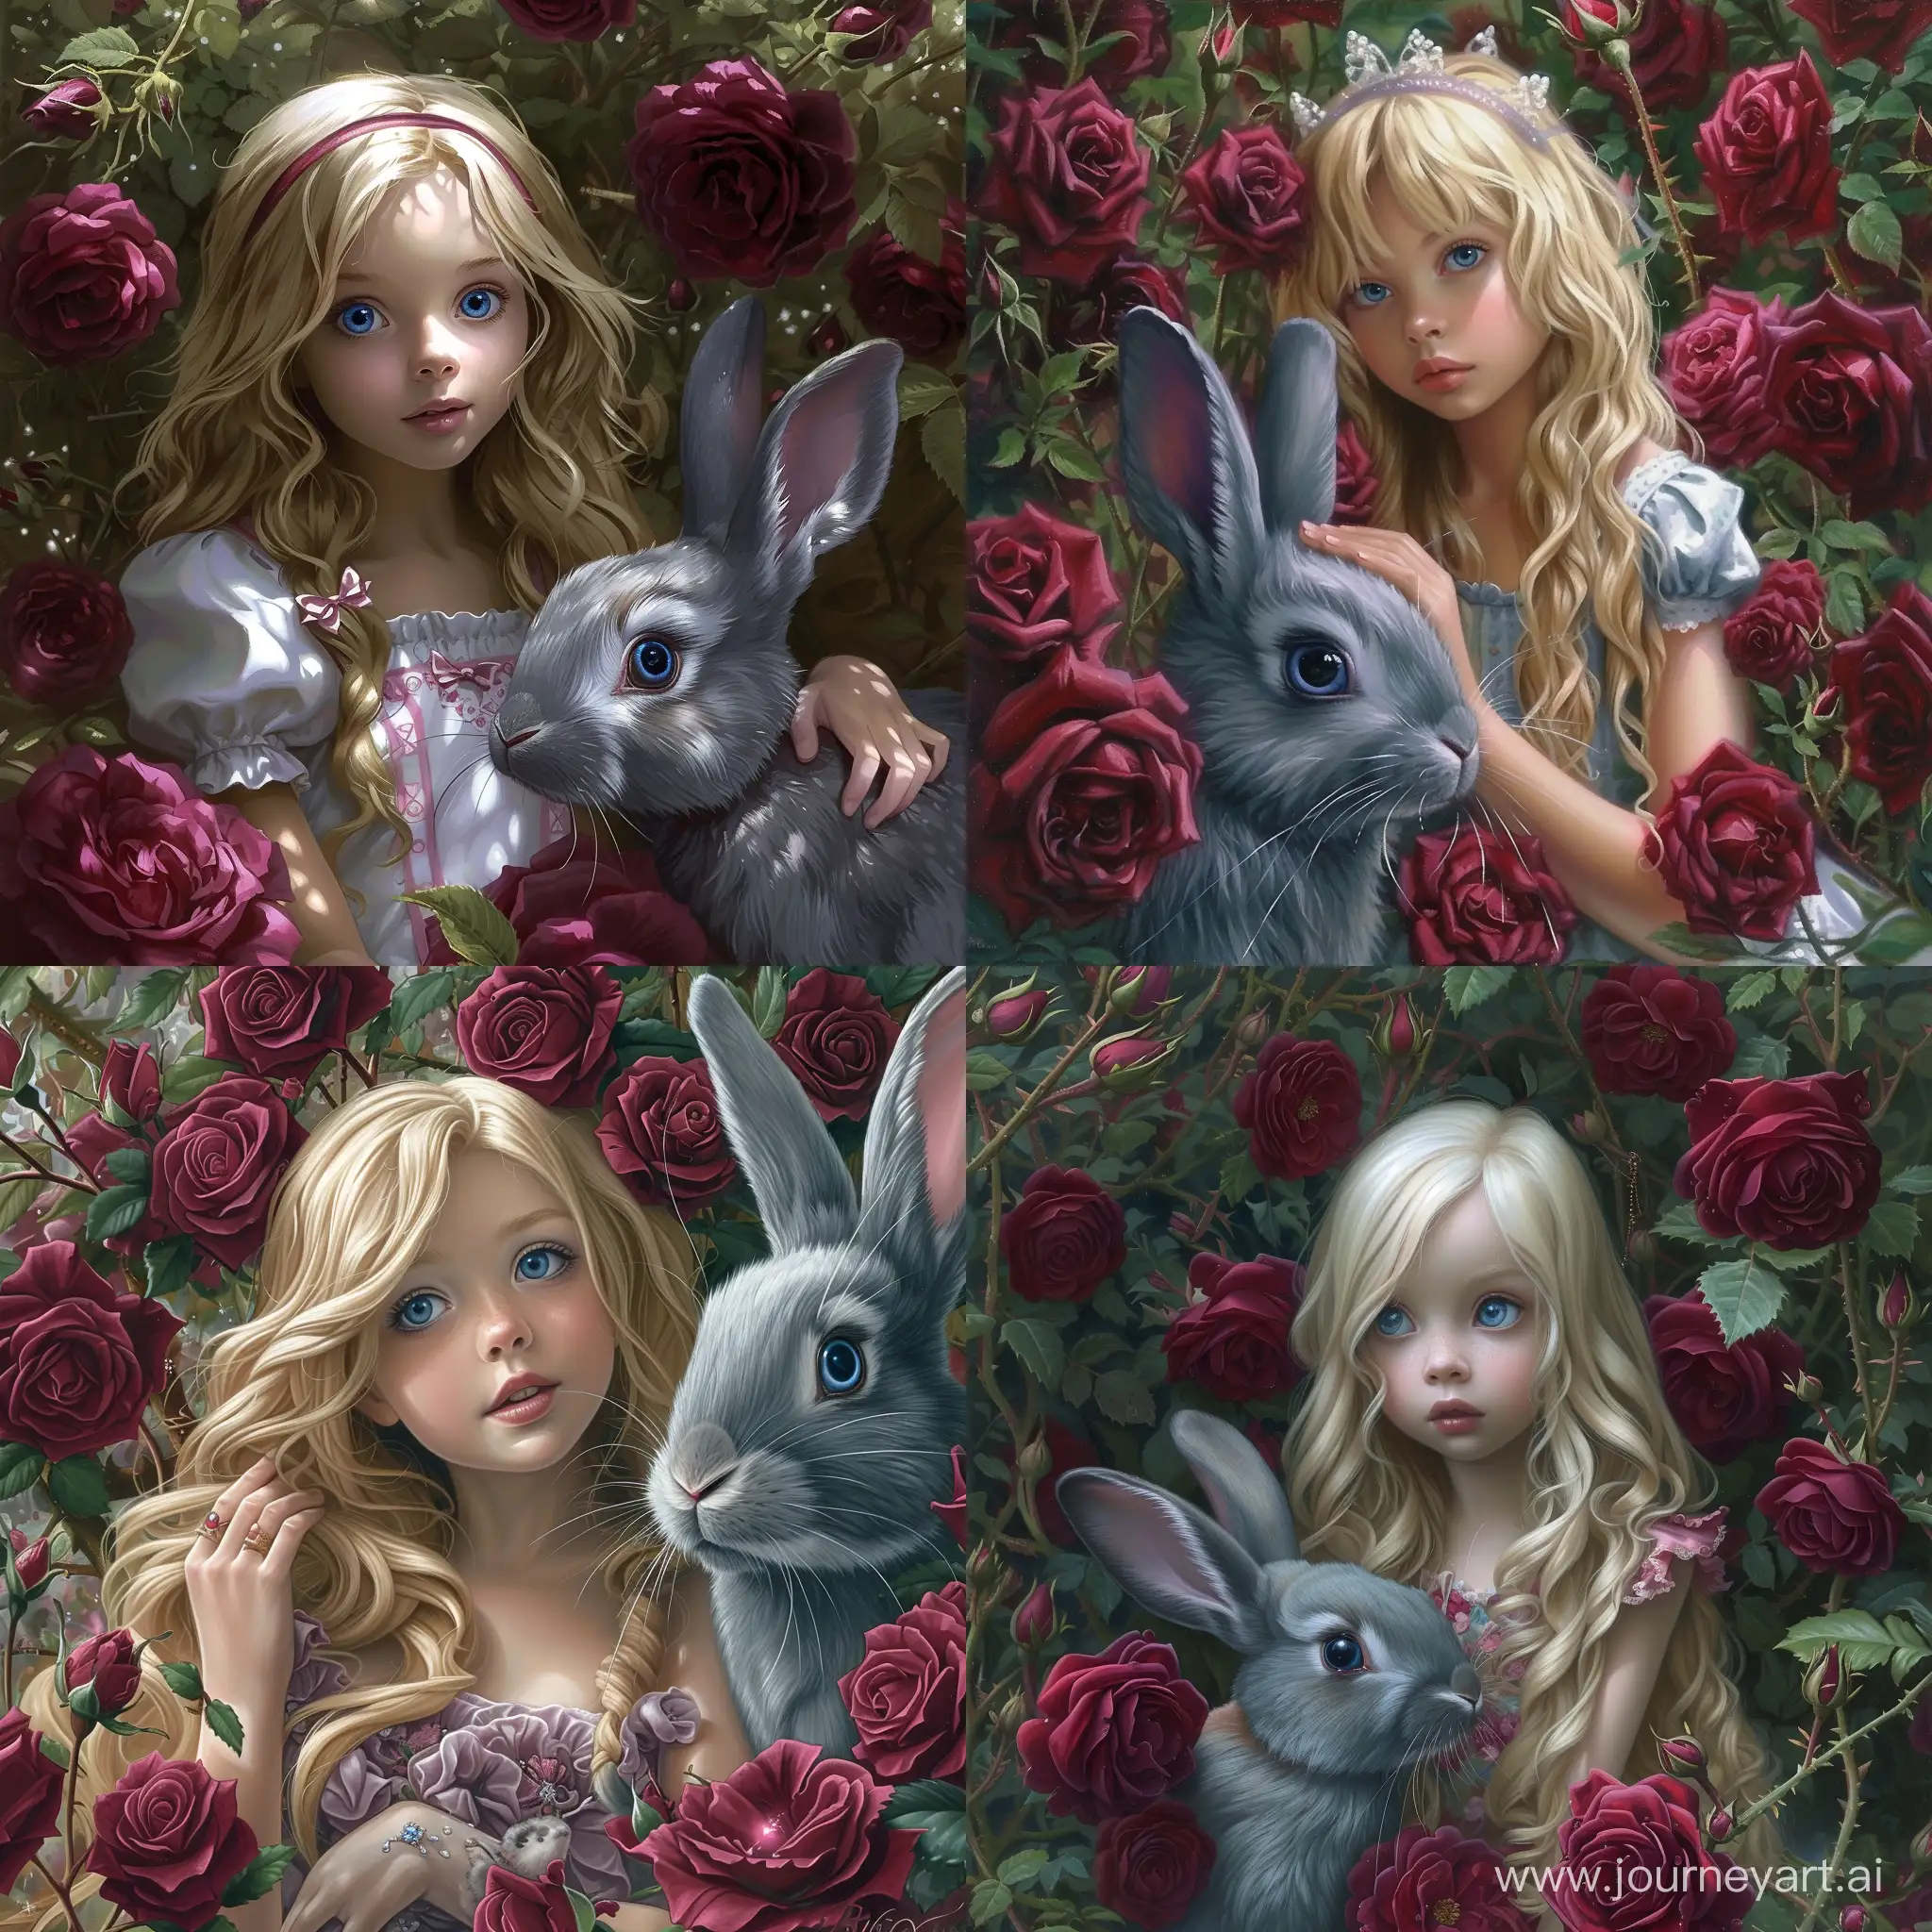 Alice-in-Wonderland-Inspired-Blonde-Girl-with-Blue-Eyes-Amidst-Burgundy-Roses-and-Gray-Rabbit